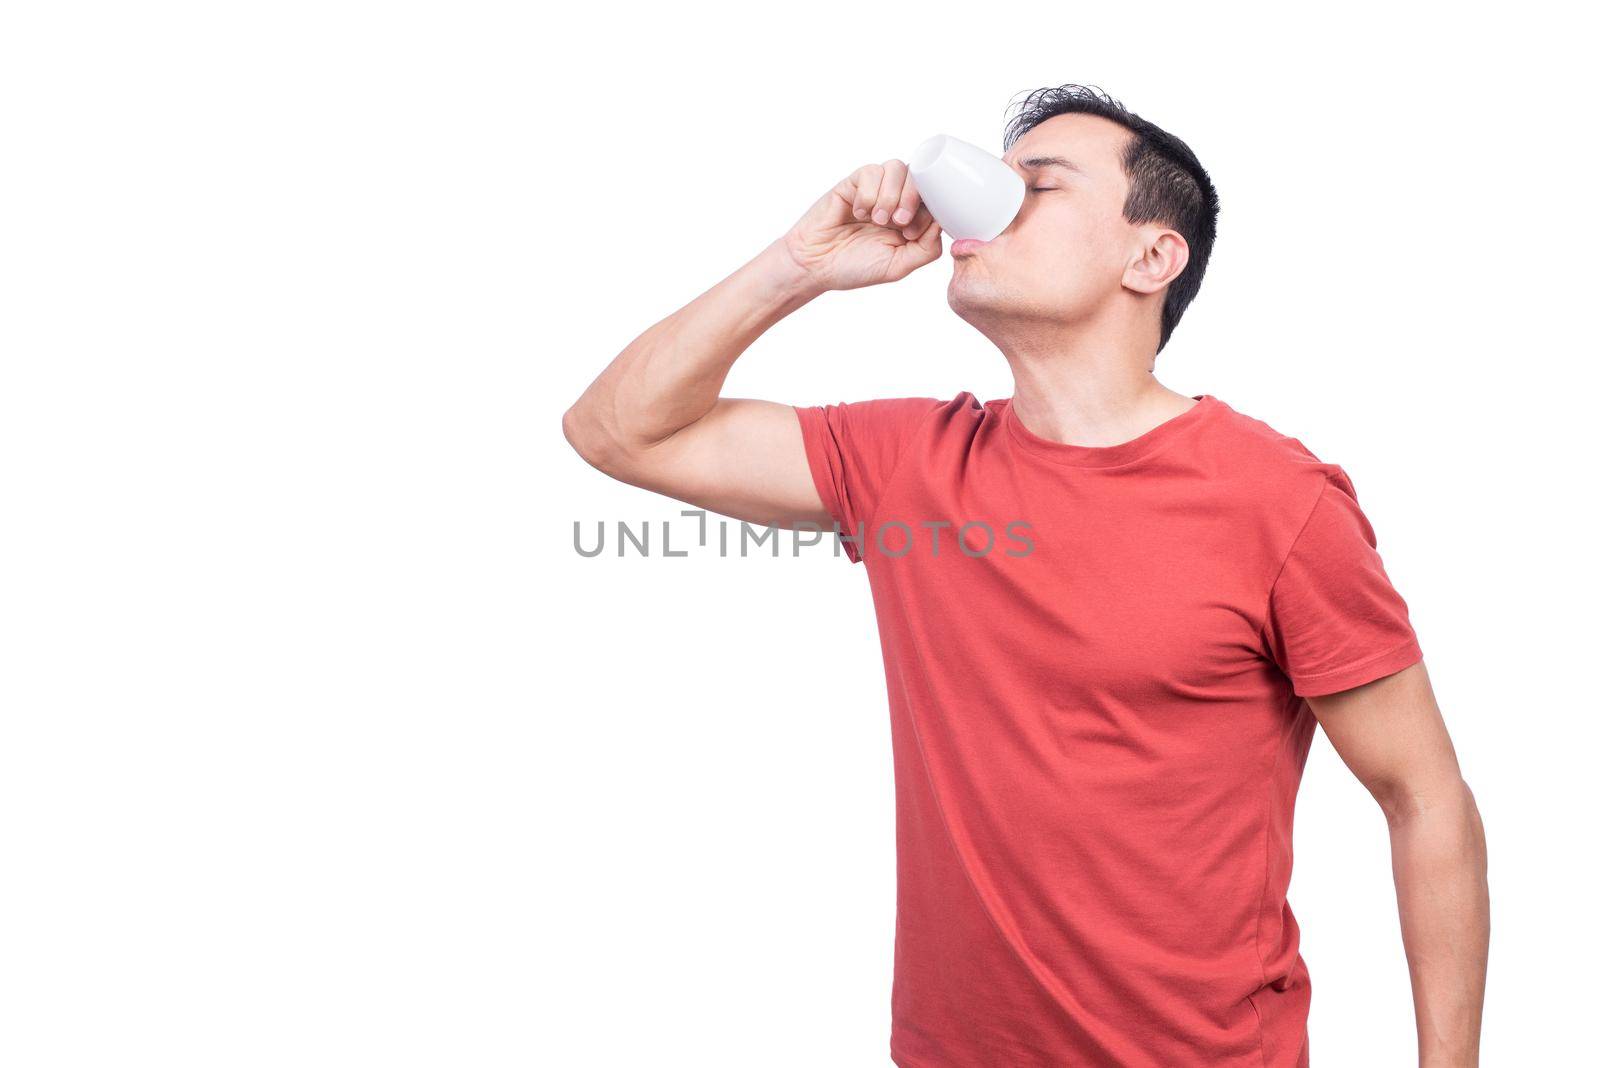 Male model in red shirt drinking coffee from white ceramic cup while standing on blank background